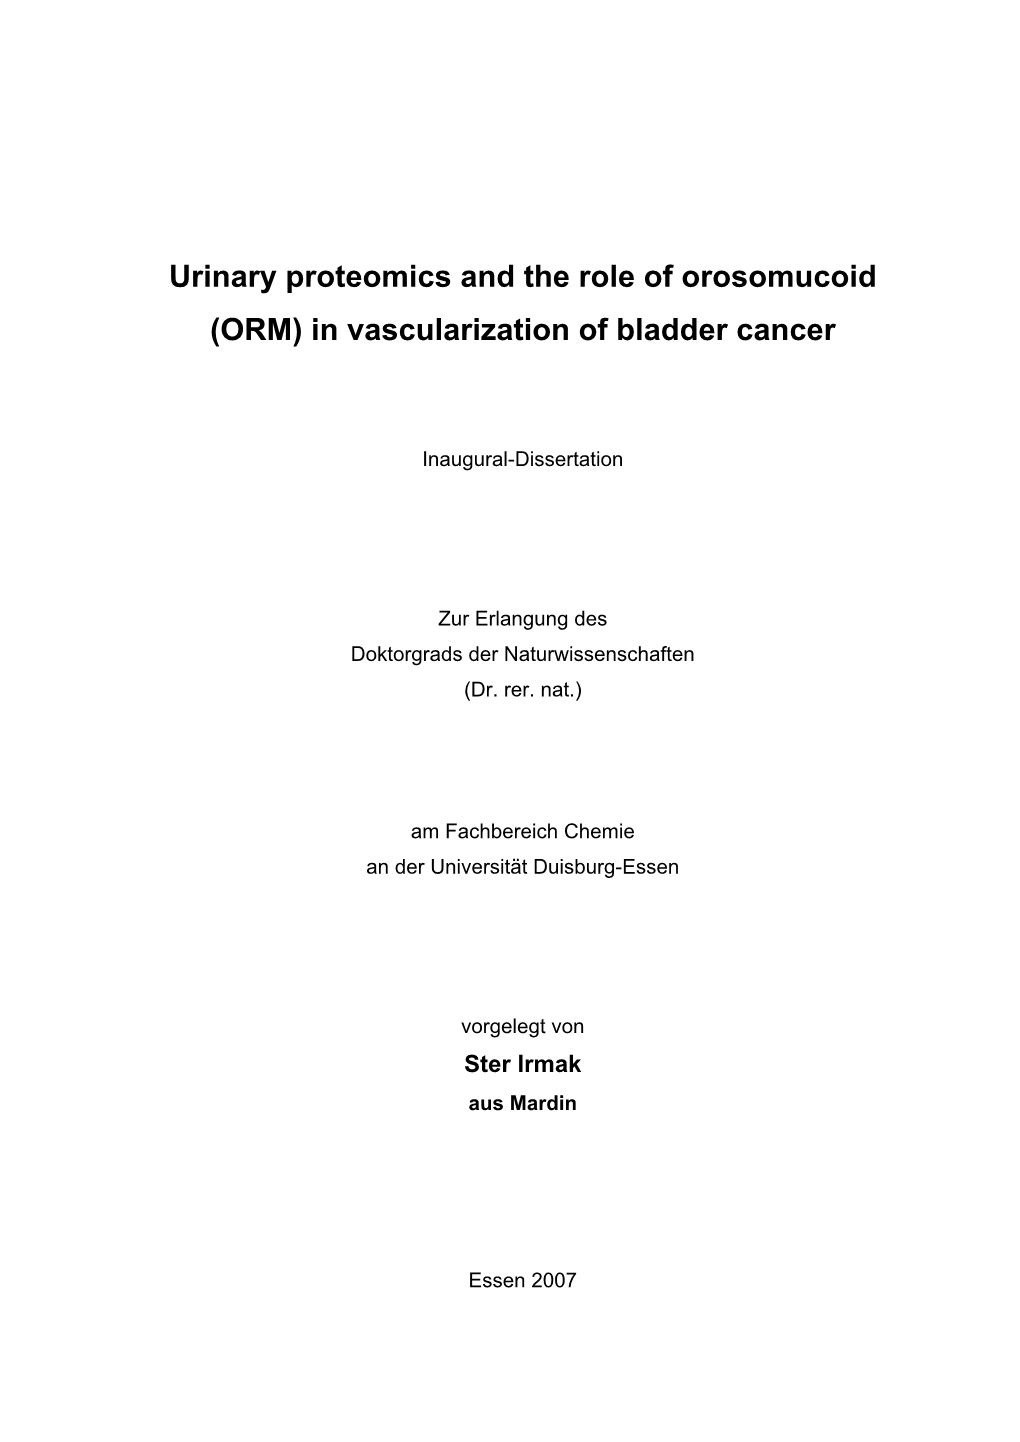 Urinary Proteomics and the Role of Orosomucoid (ORM) in Vascularization of Bladder Cancer